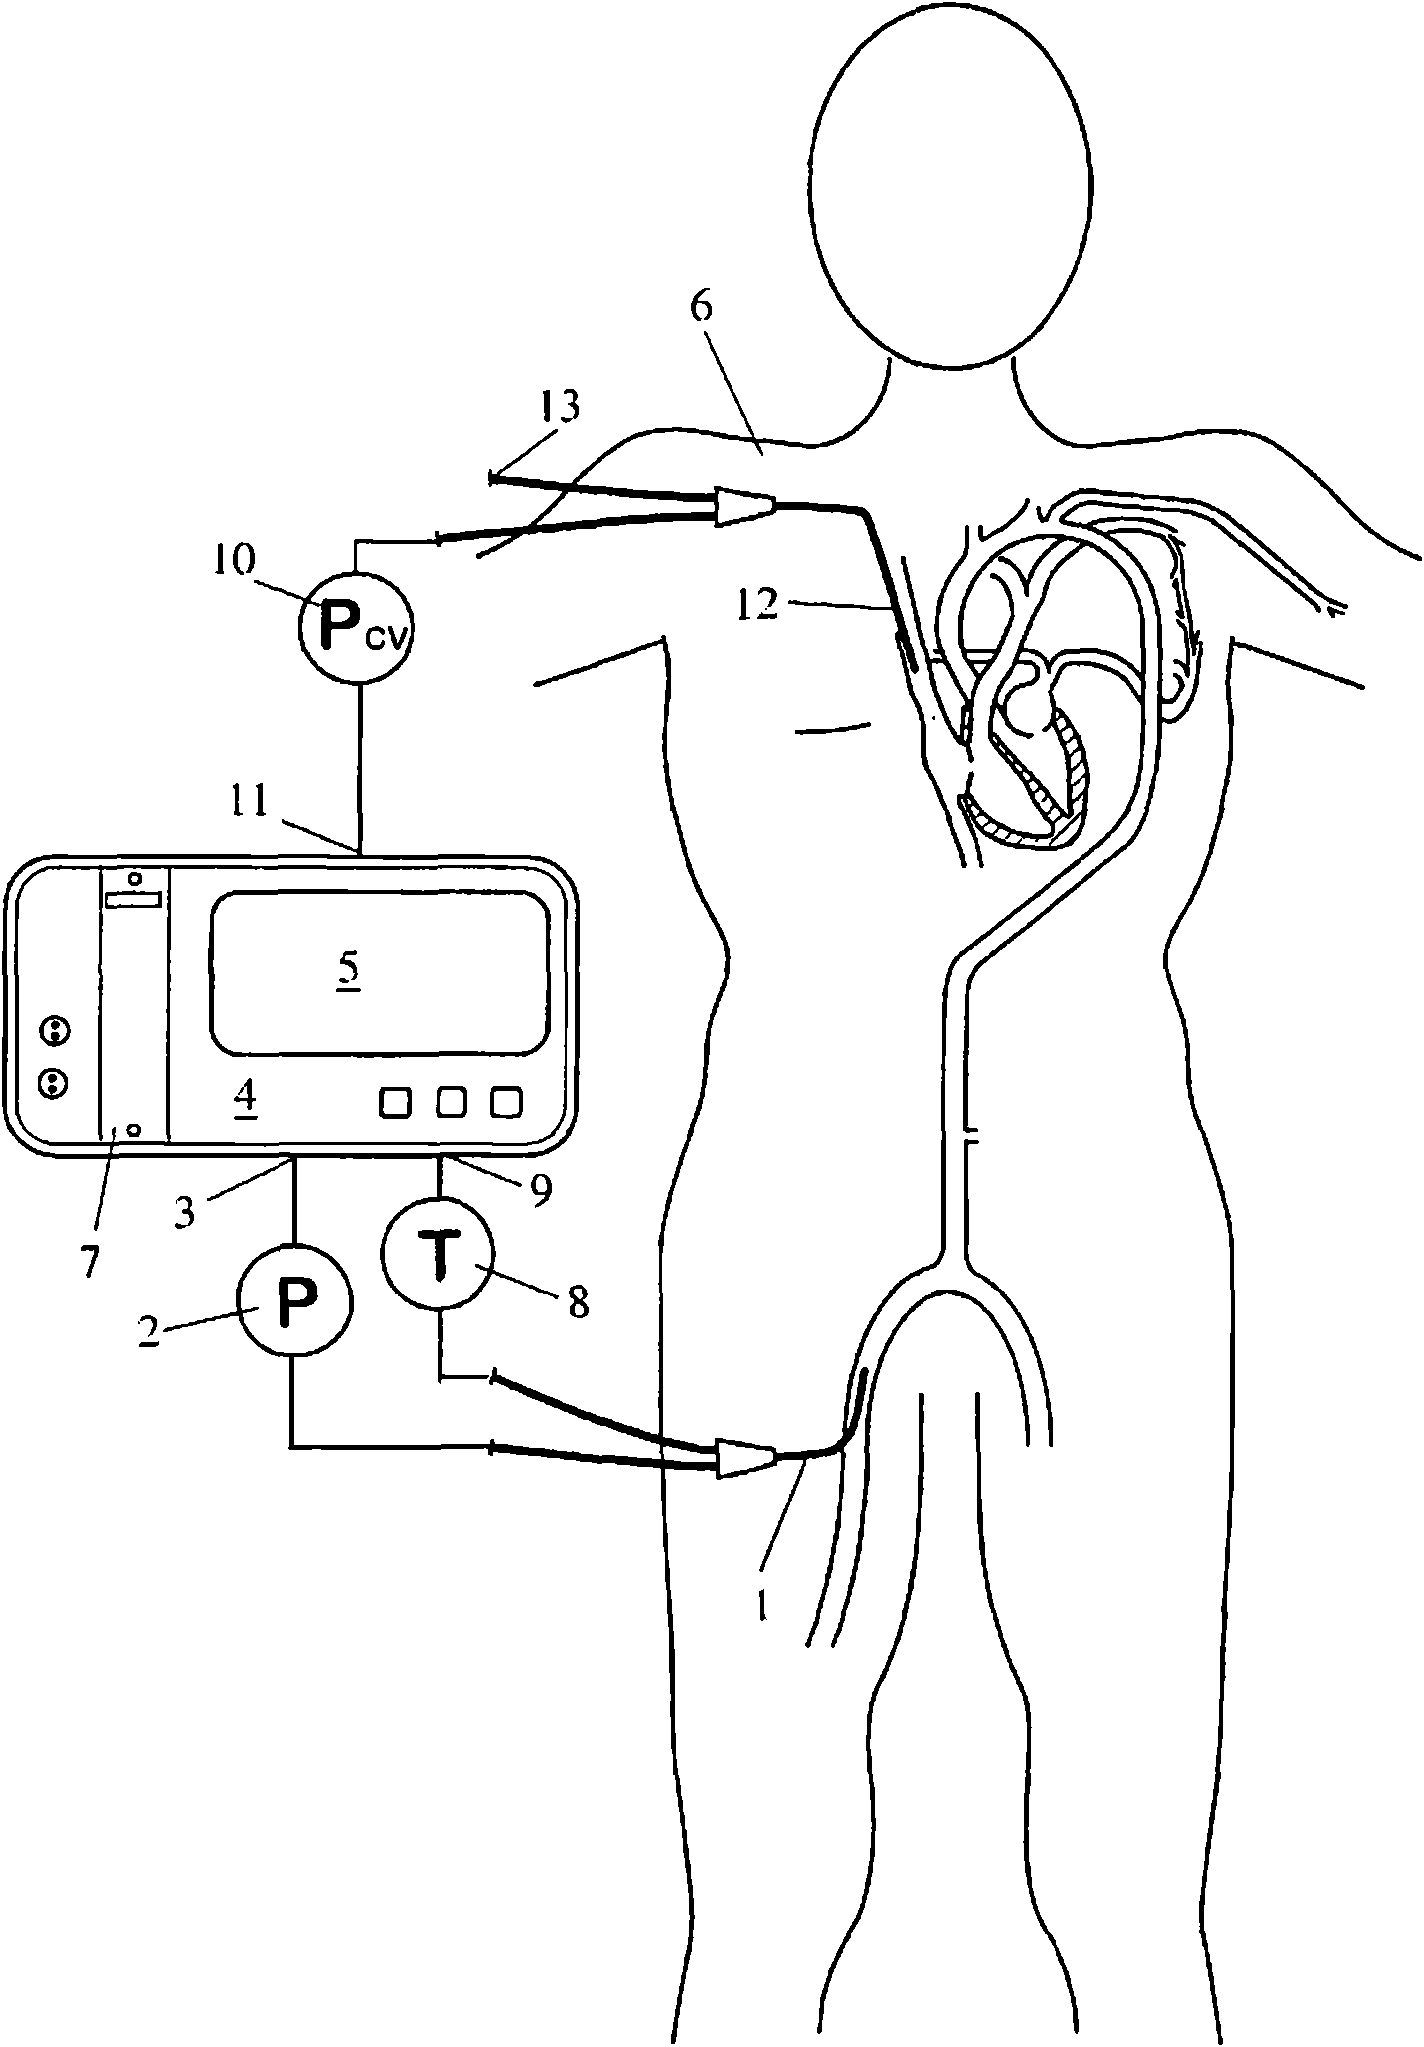 Apparatus and method for determining physiologic parameters of a patient